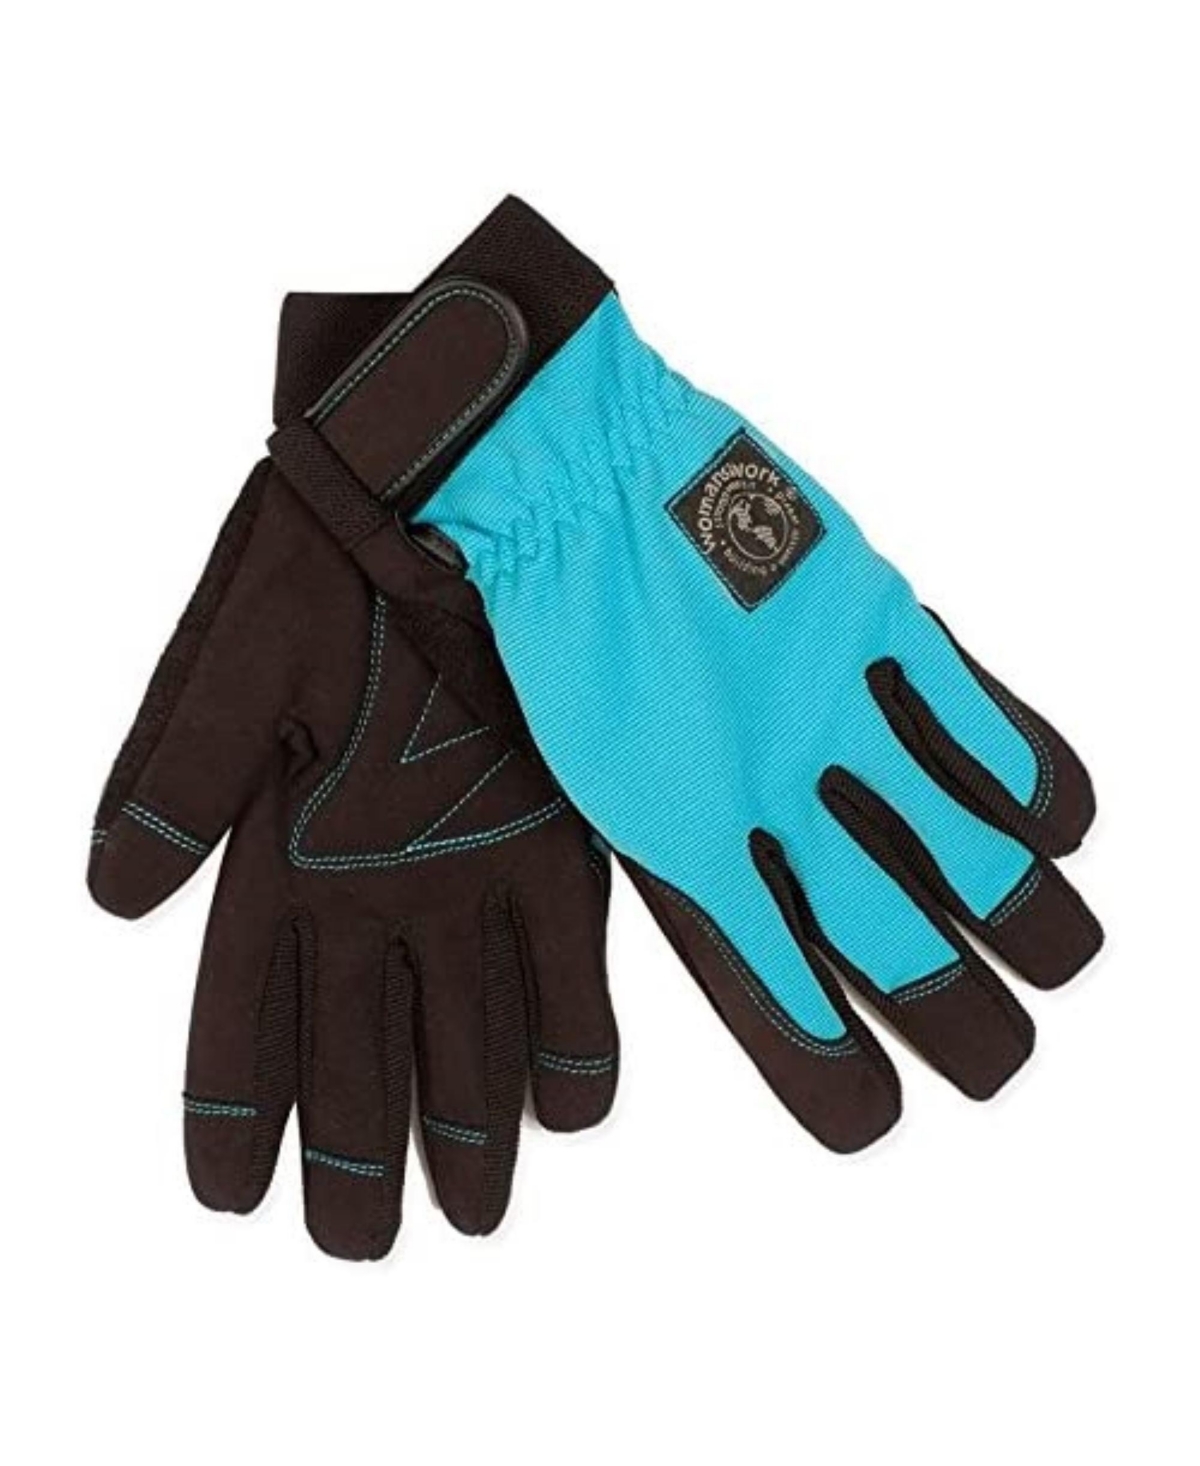 Digger Gardening Glove with Micro Suede Palm, Teal, Medium - Blue